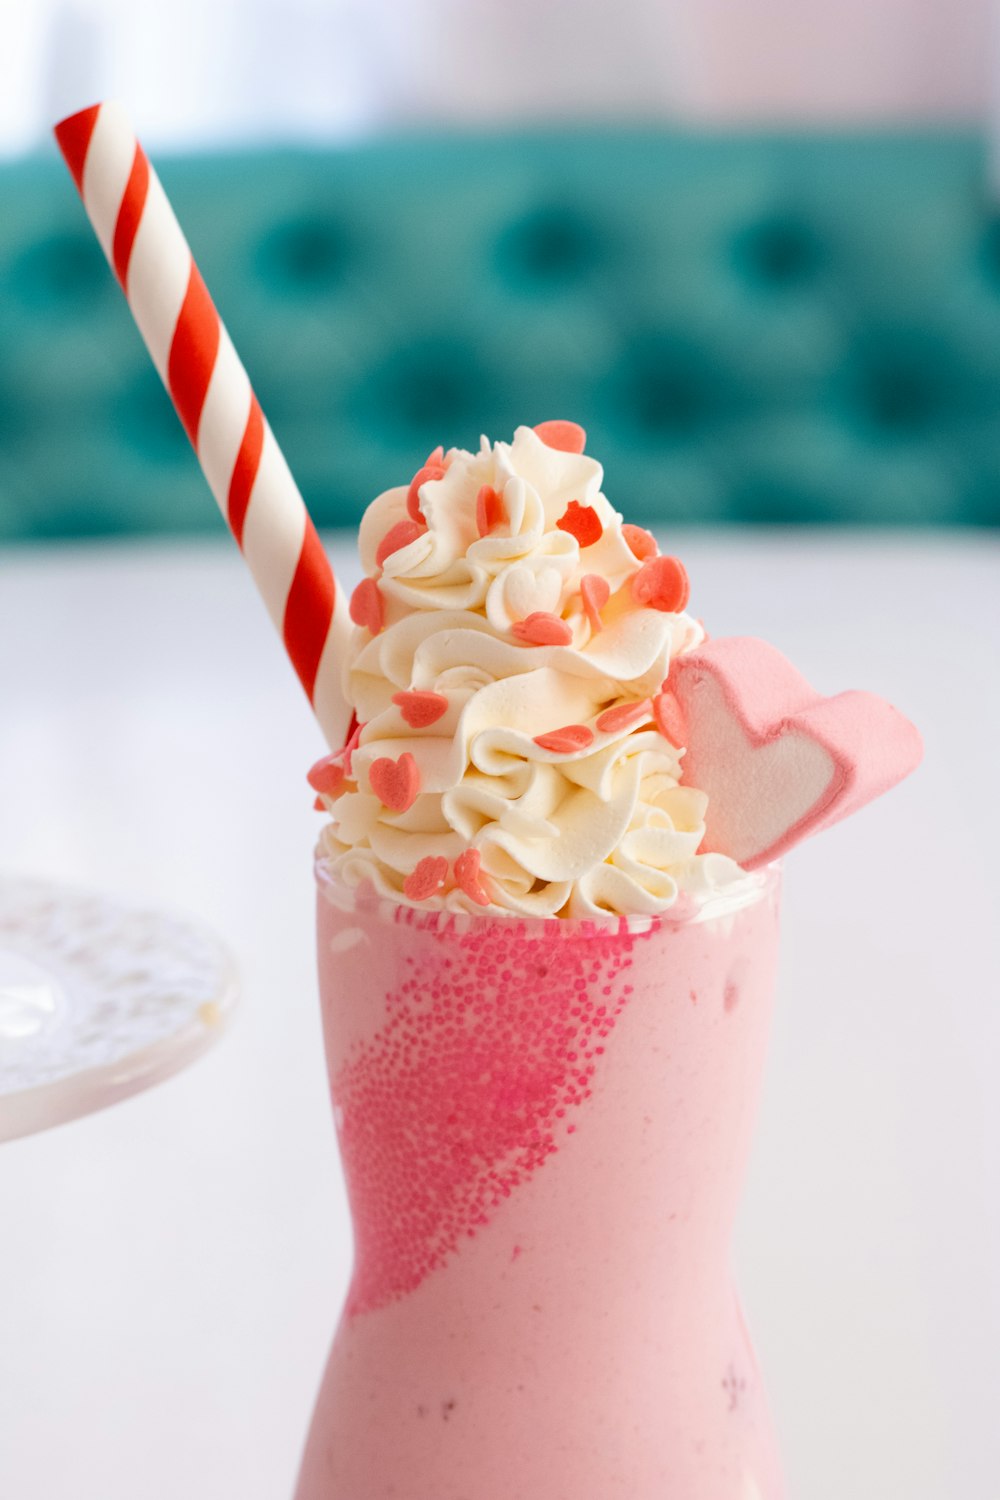 a pink drink with whipped cream and a candy cane